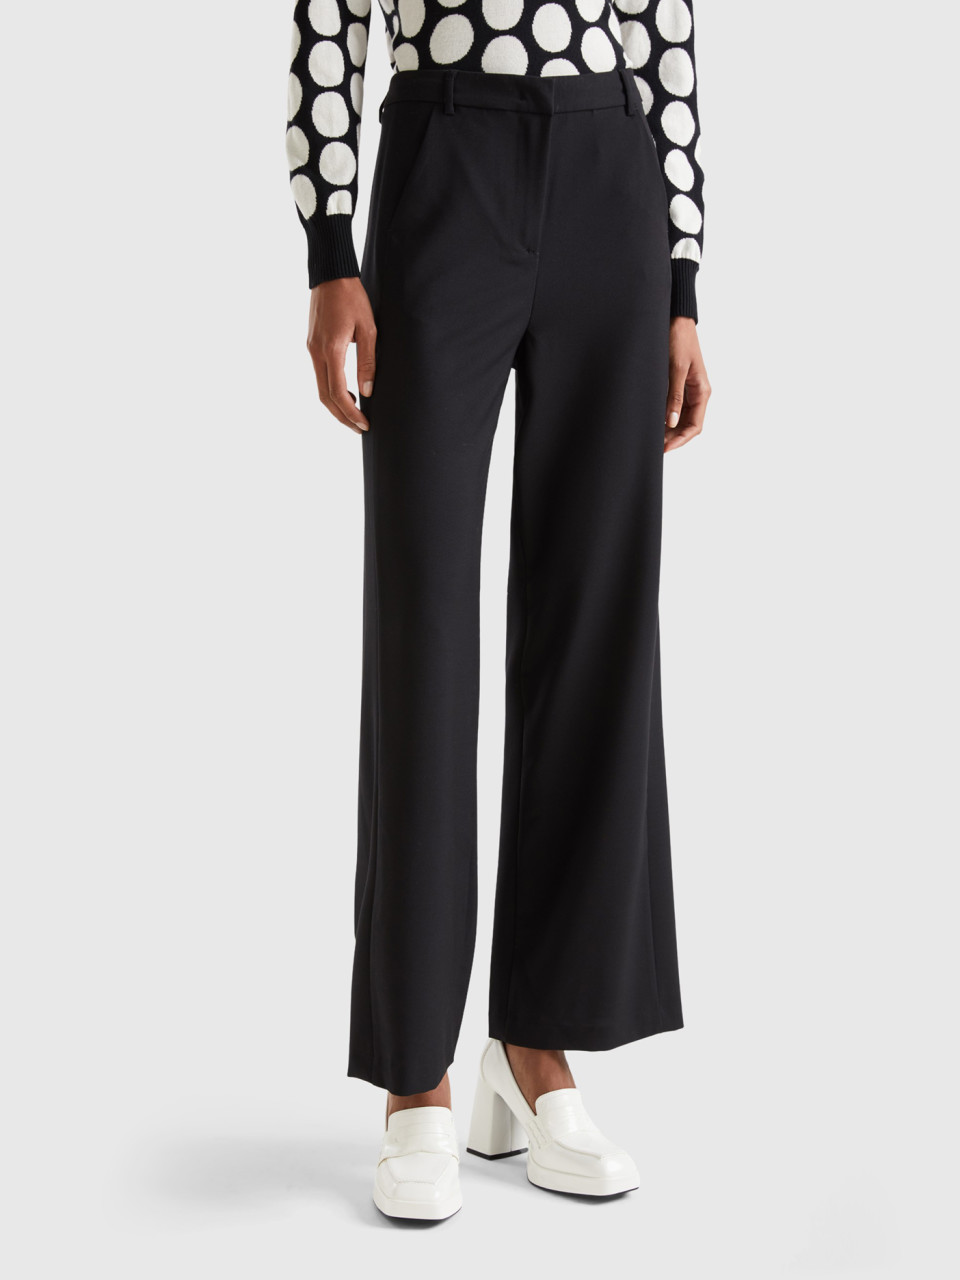 Benetton, Flowy Trousers With Tapered Leg, Black, Women